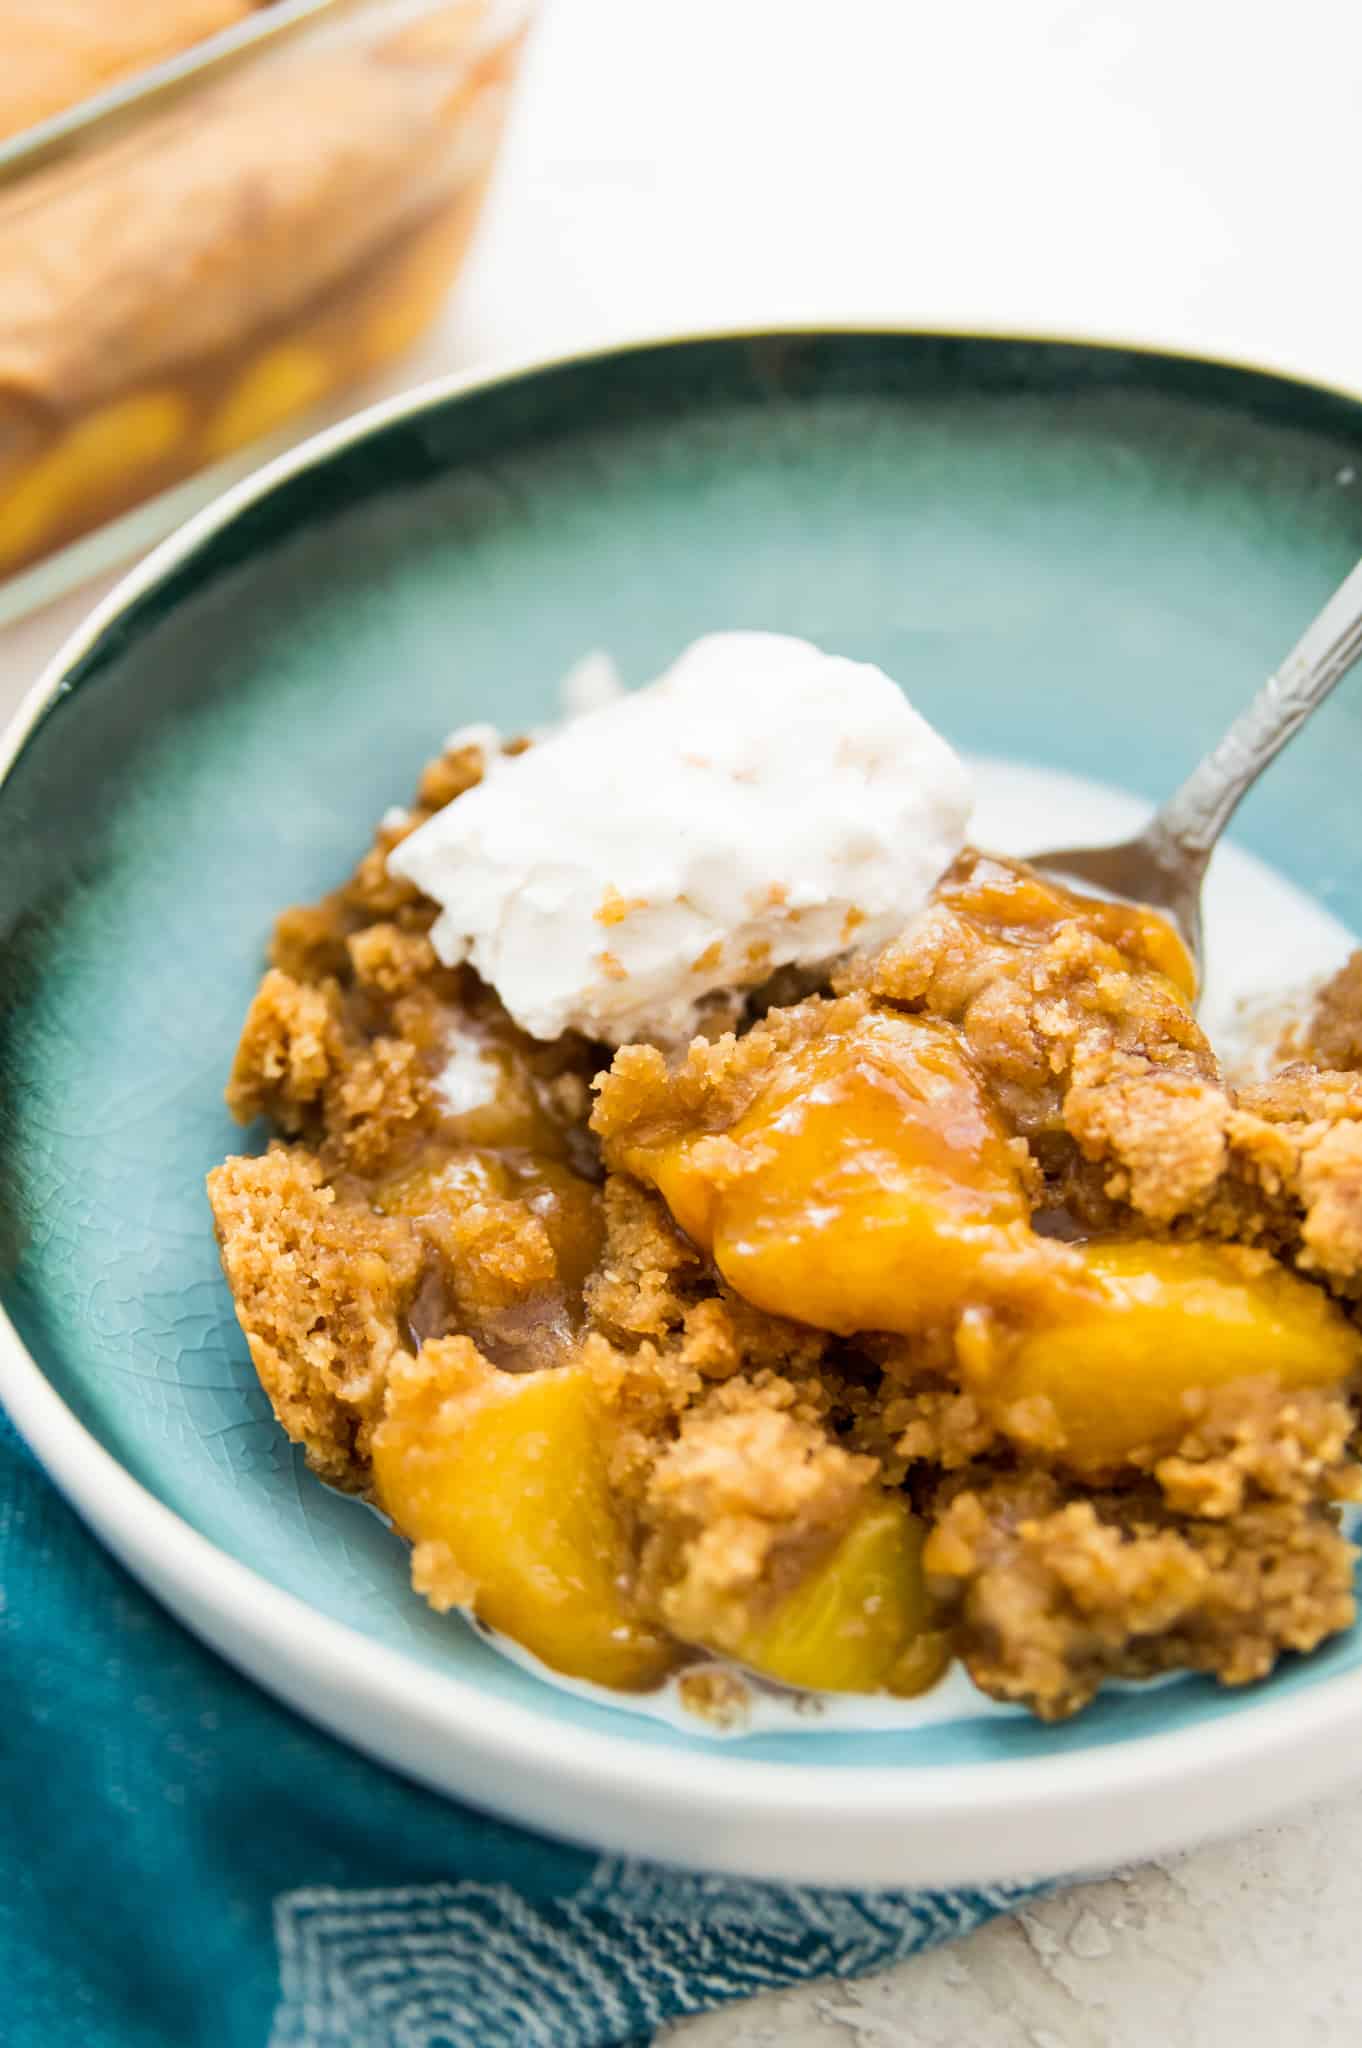 A bowl of peach cobbler with vanilla ice cream on top.